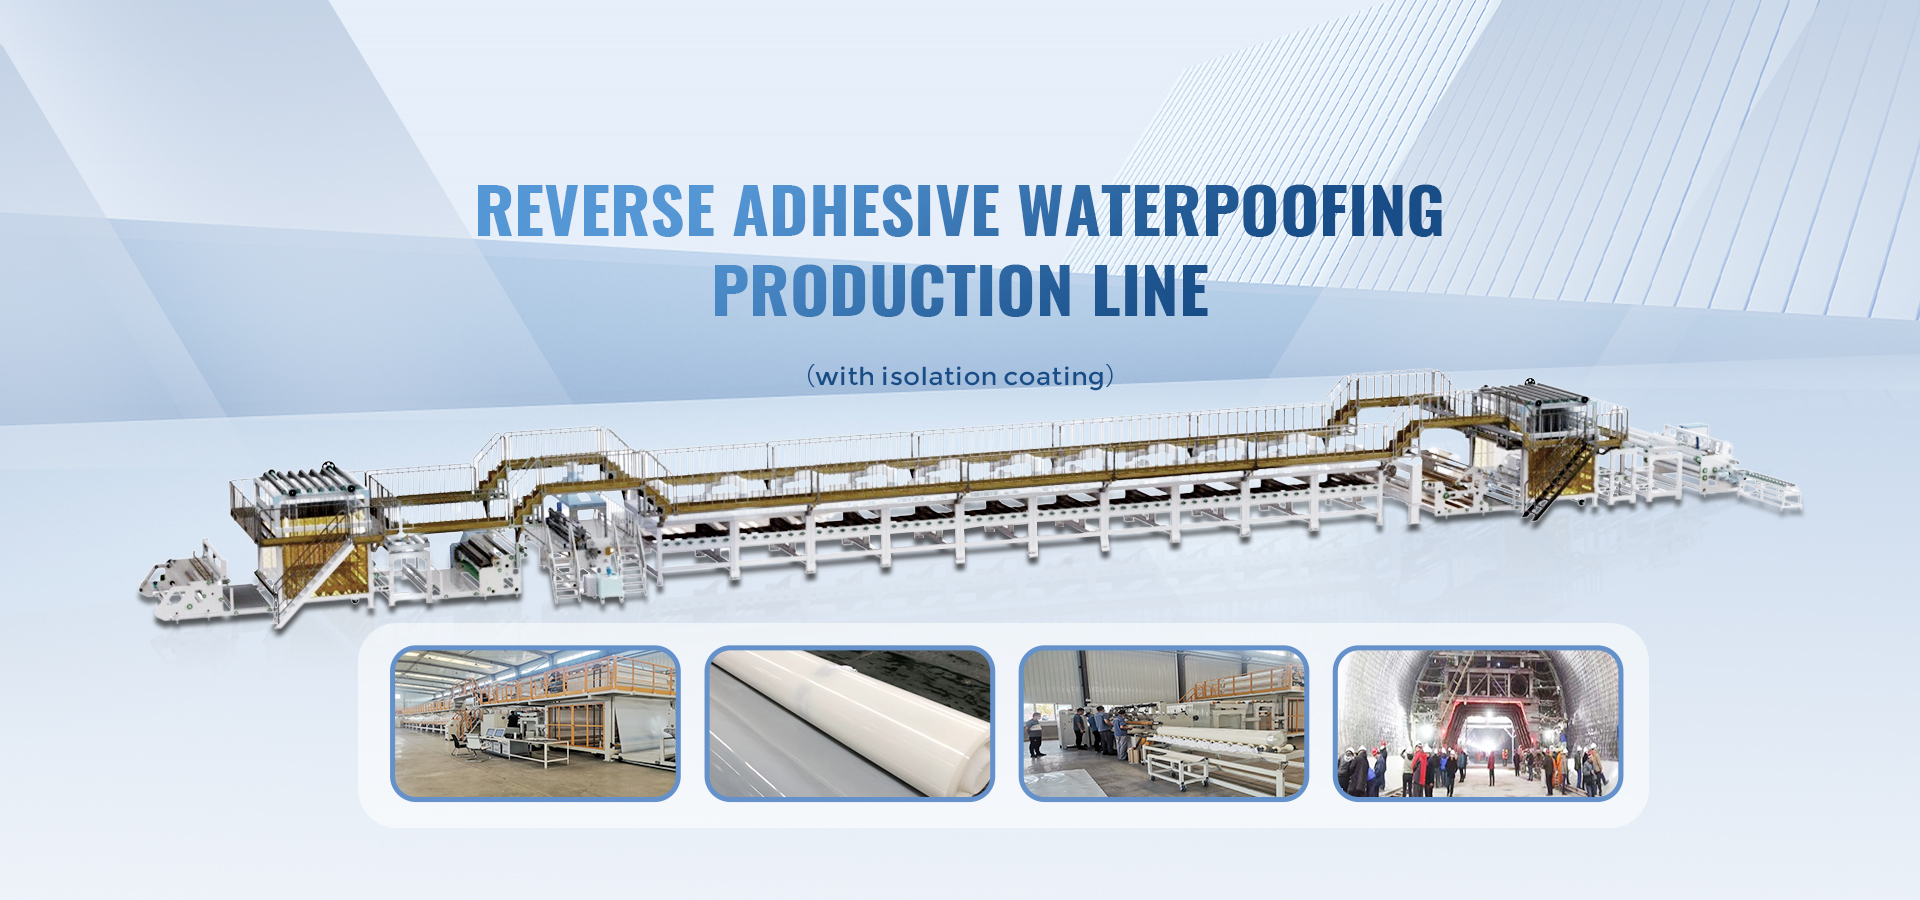 REVERSE ADHESIVE WATERPOOFING PRODUCTION LINE